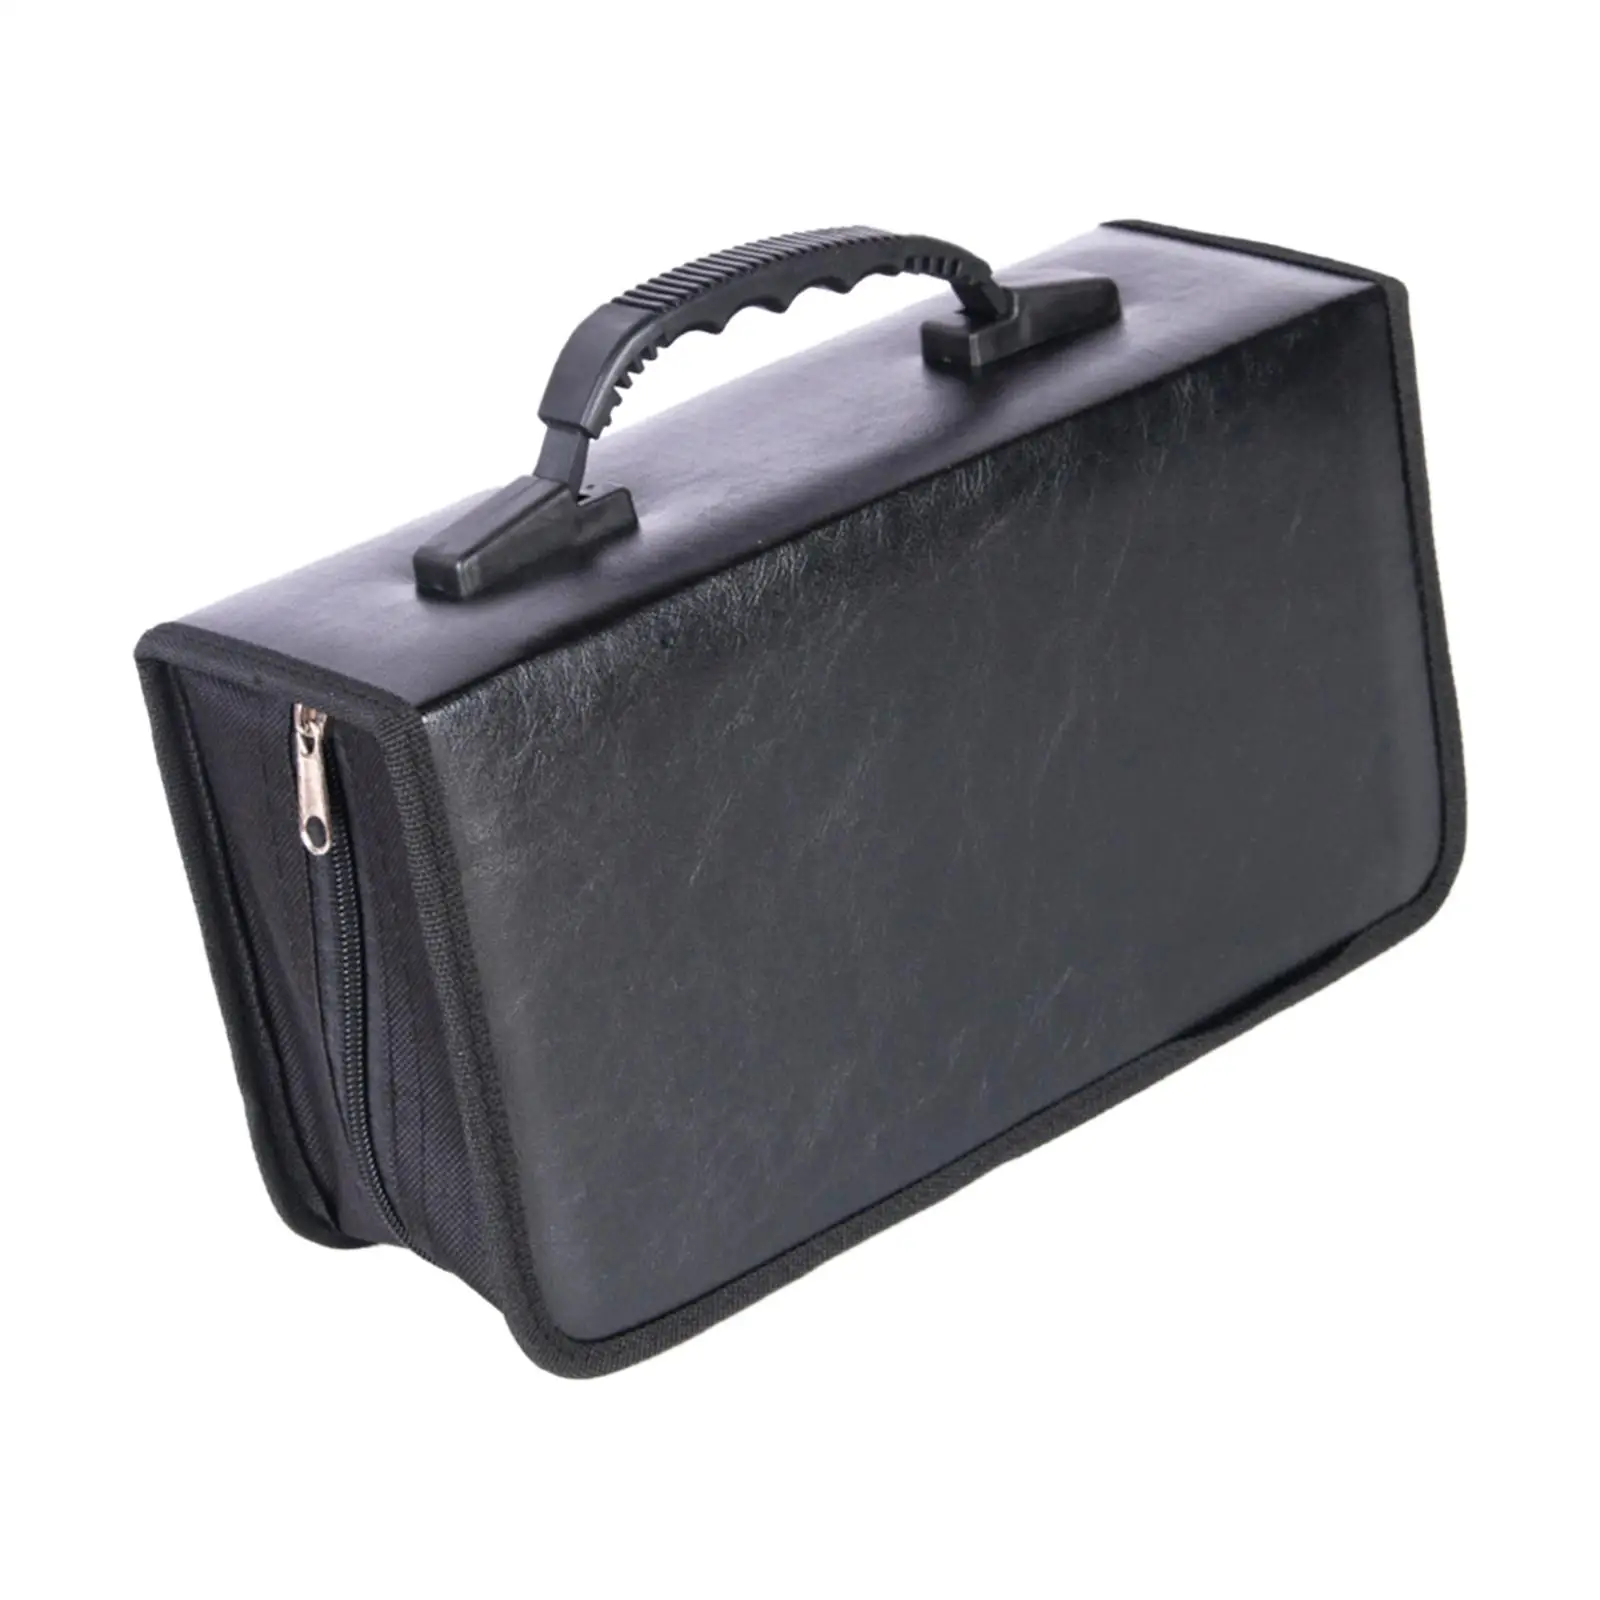 CD Case Carrying Protective Portable DVD Vcd Storage Box Organizer Bag DVD Package for Office Games Disc Travel Car